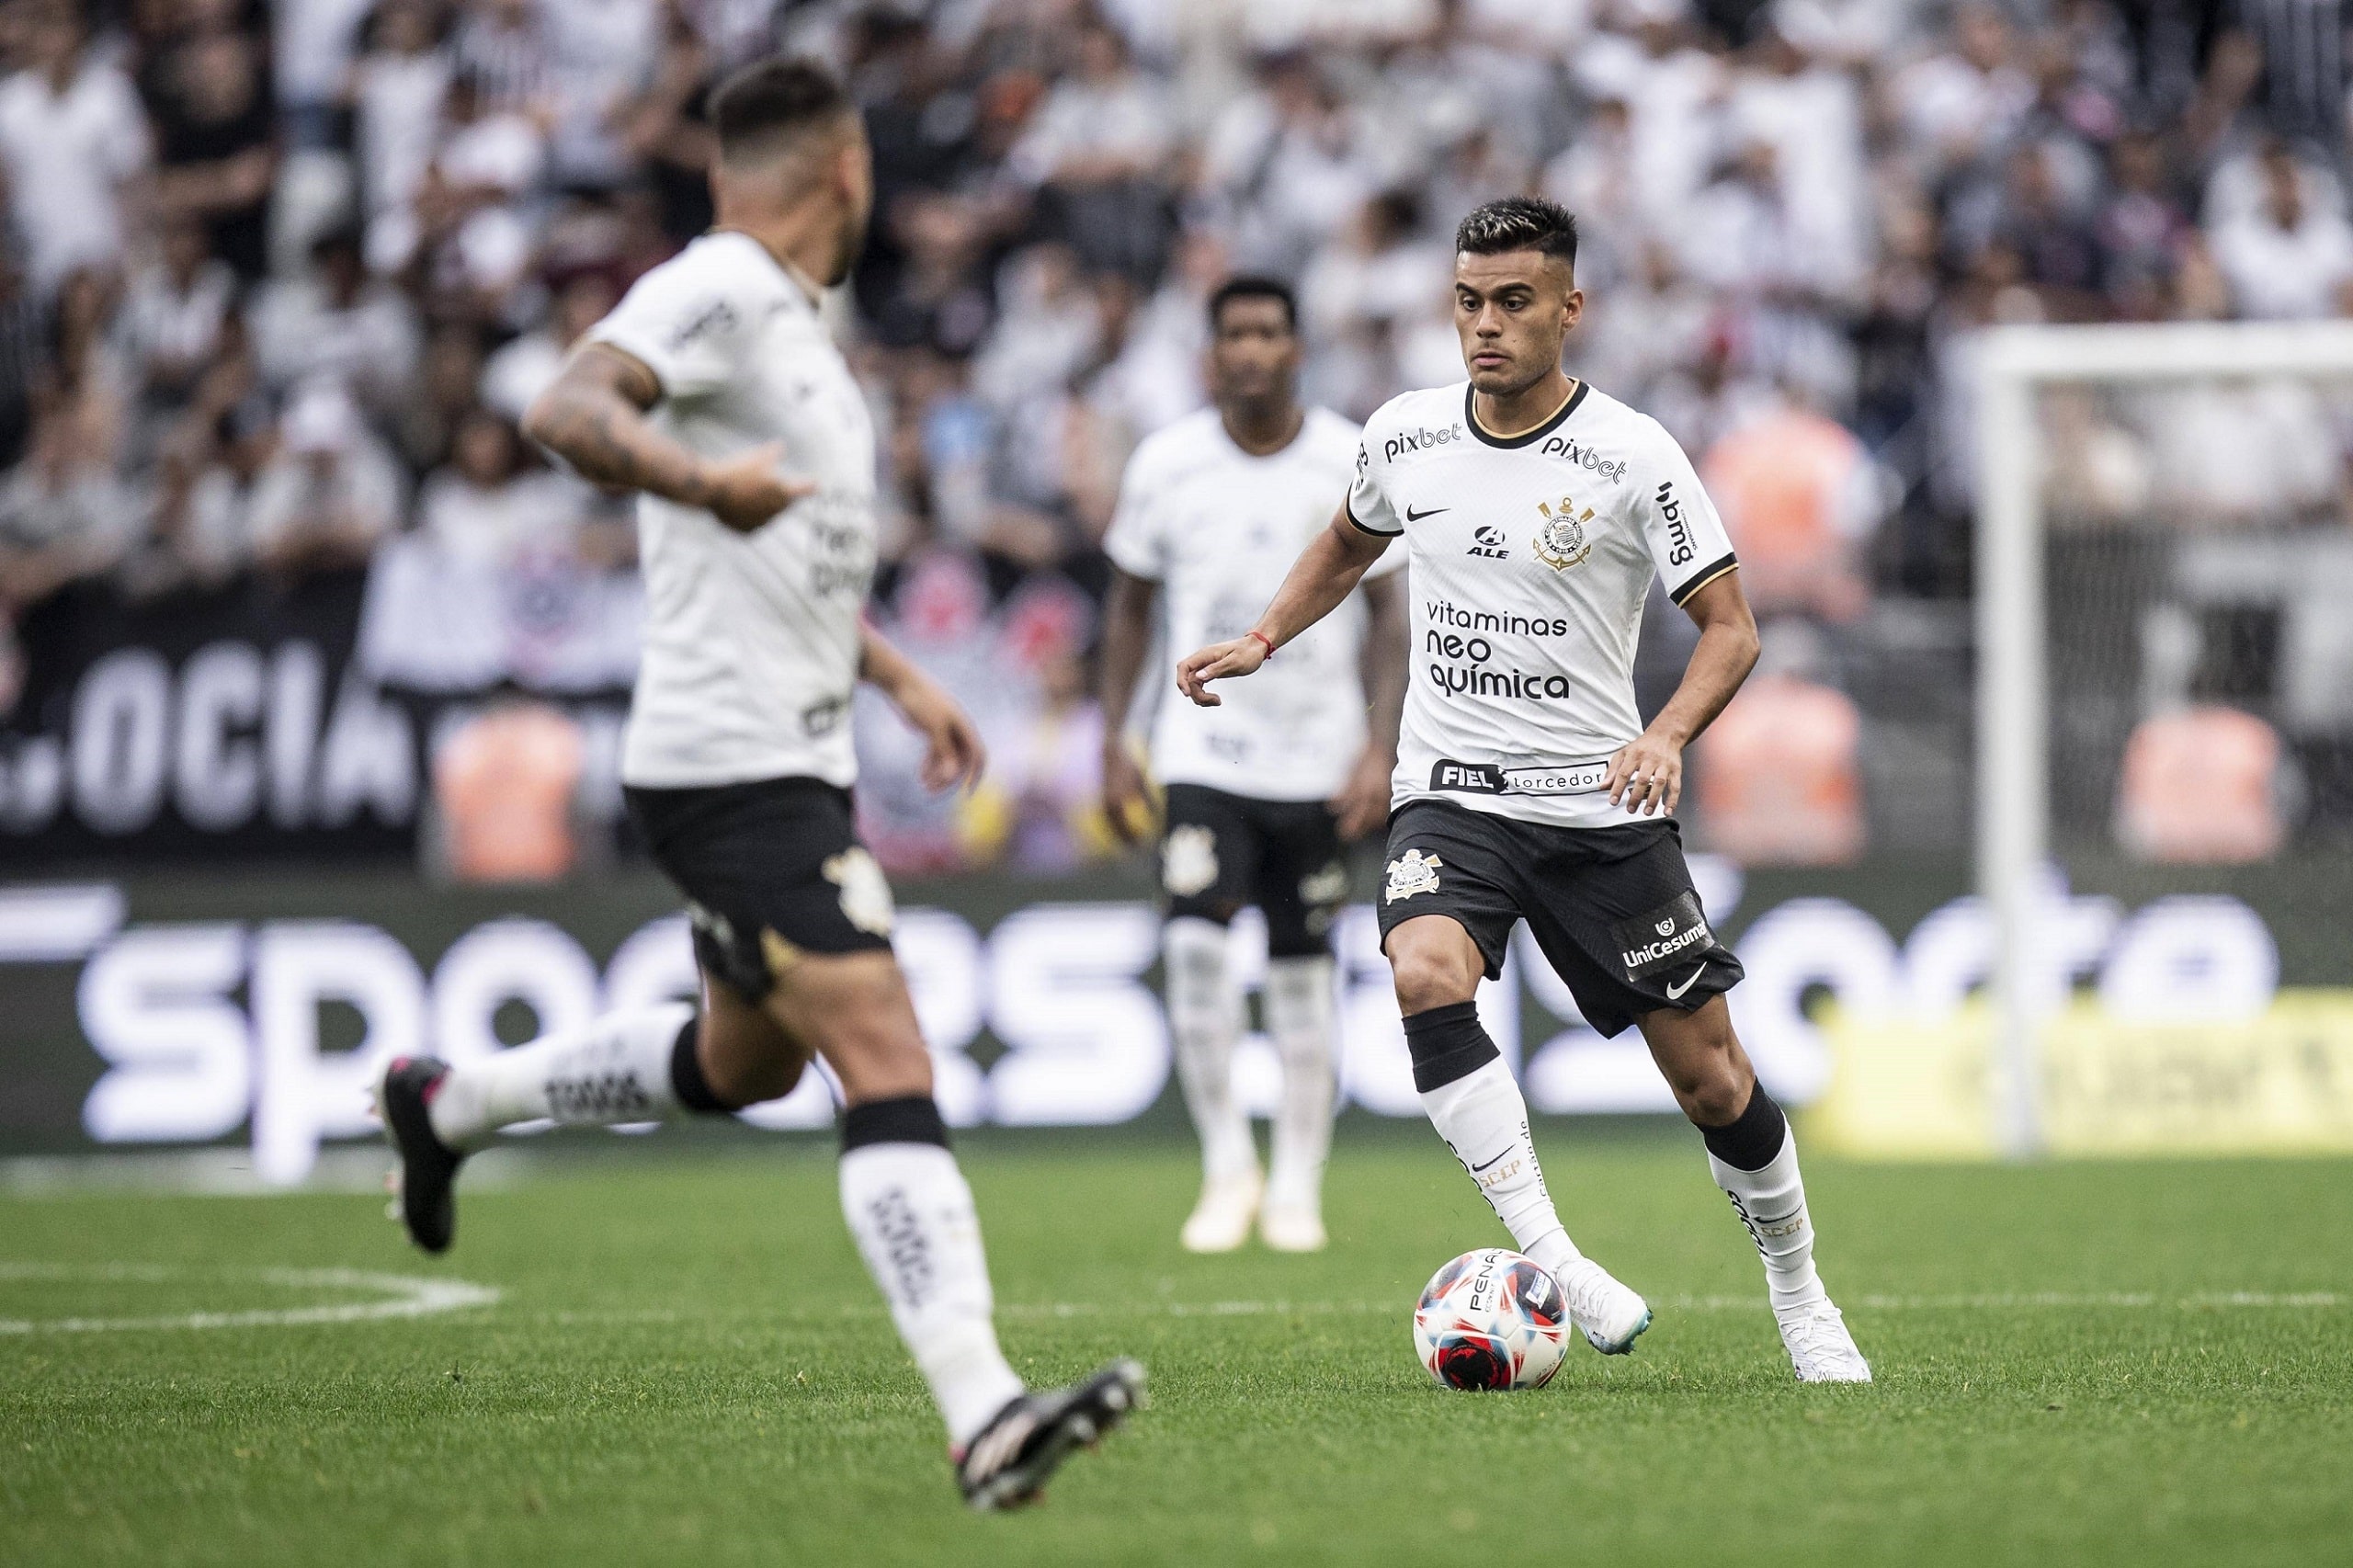 Corinthians x Ituano SÃO PAULO, SP - 12.03.2023: CORINTHIANS X ITUANO - Fausto Vera during the match between Corinthians and Ituano held at Neo Química Arena in São Paulo, SP.